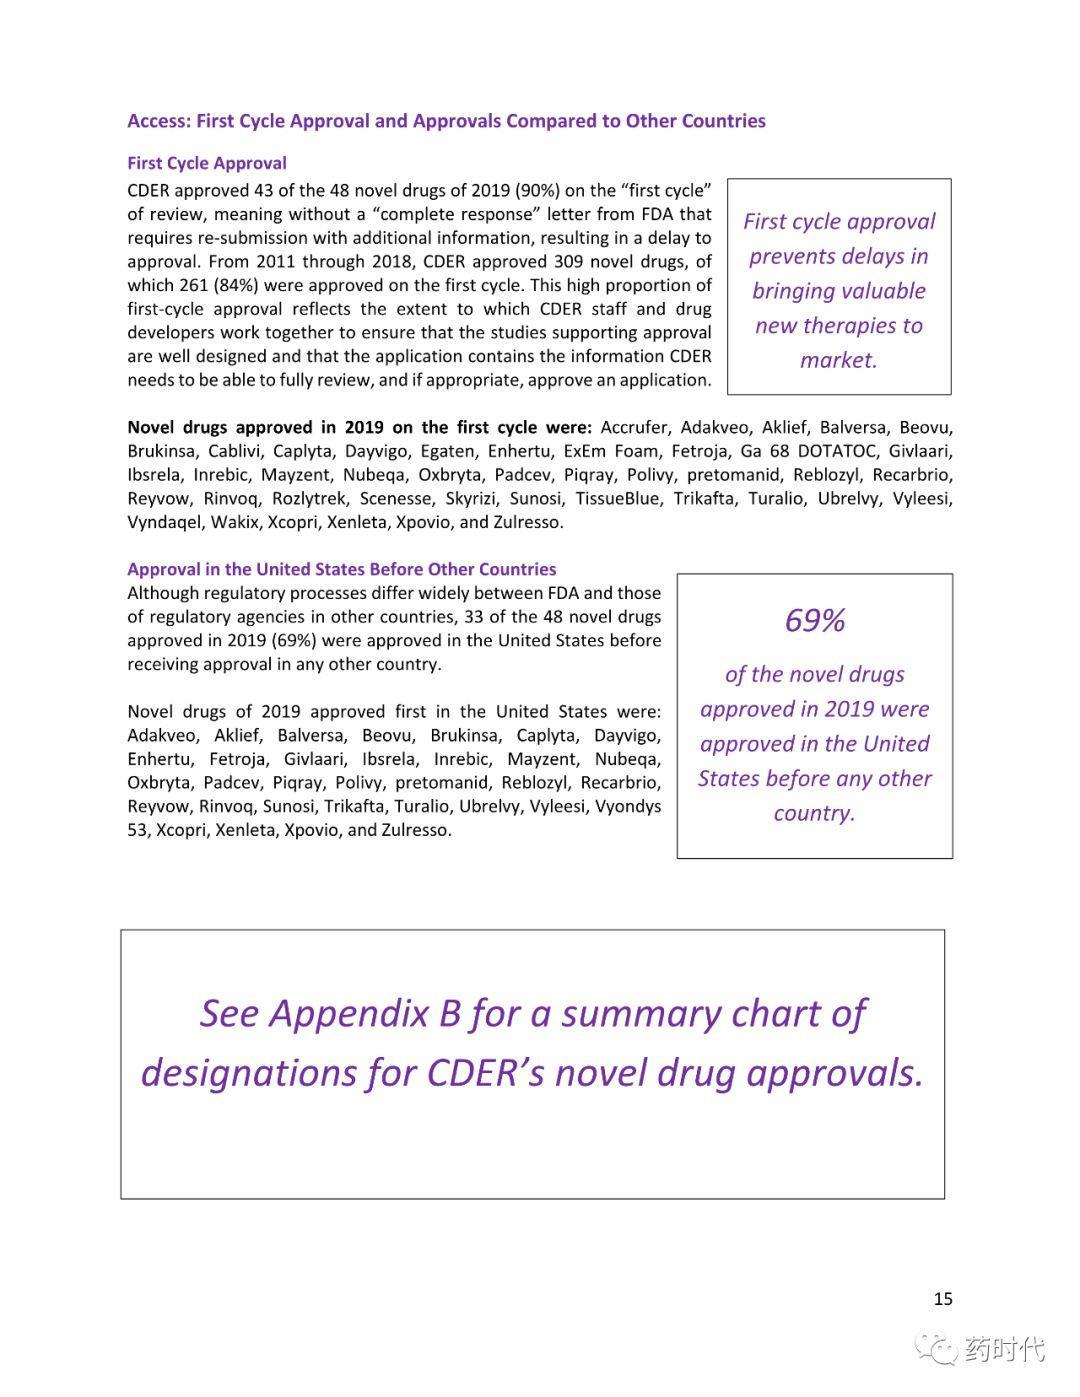 FDA官宣 | 2019年新药批准报告（2019 New Drug Therapy Approvals）